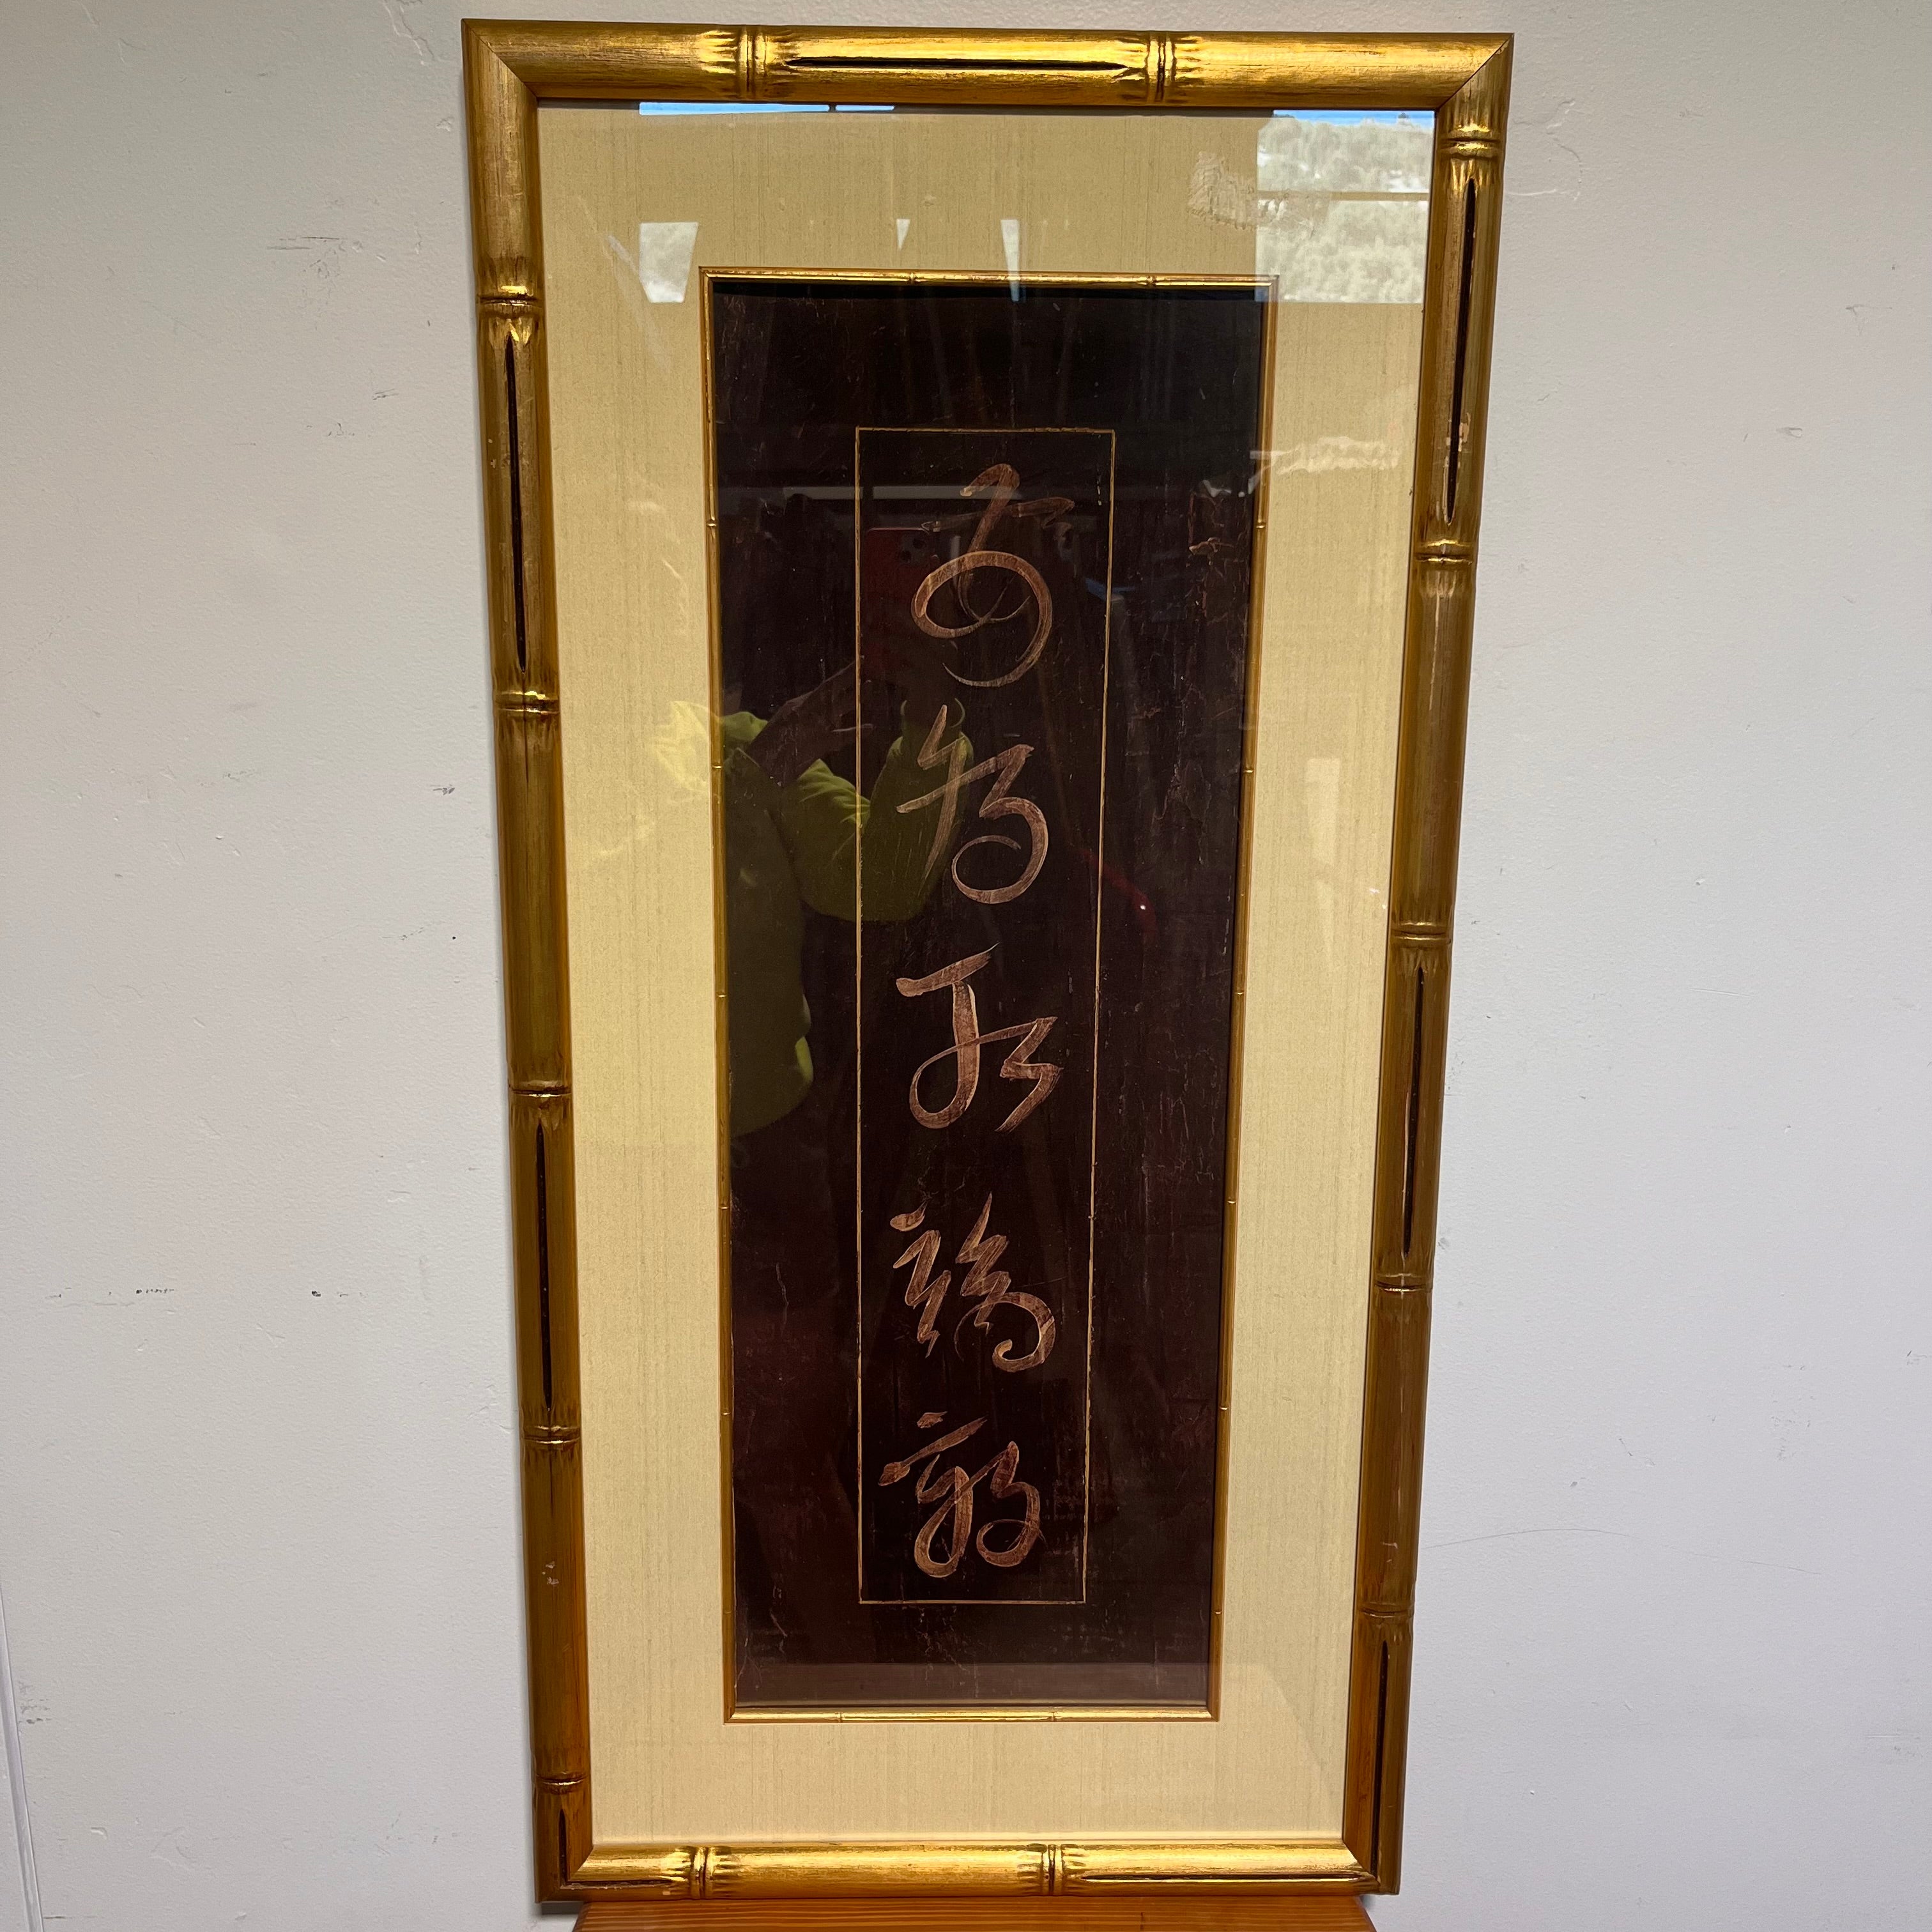 Japanese Calligraphy Wall Art by New Century 19.25"x 39"